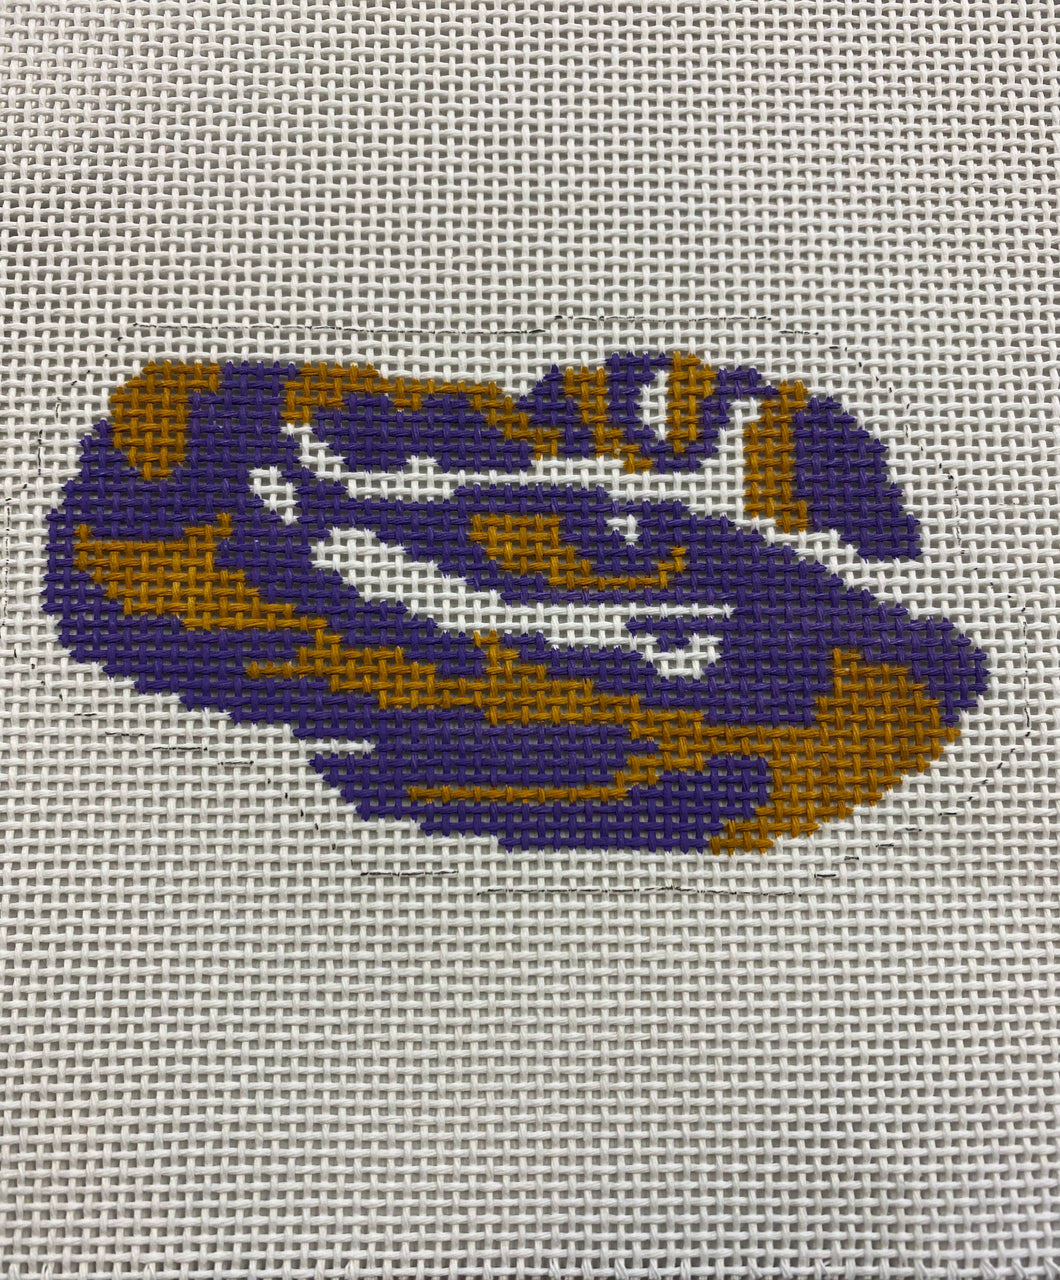 LSU Eye of the Tiger Needlepoint Ornament